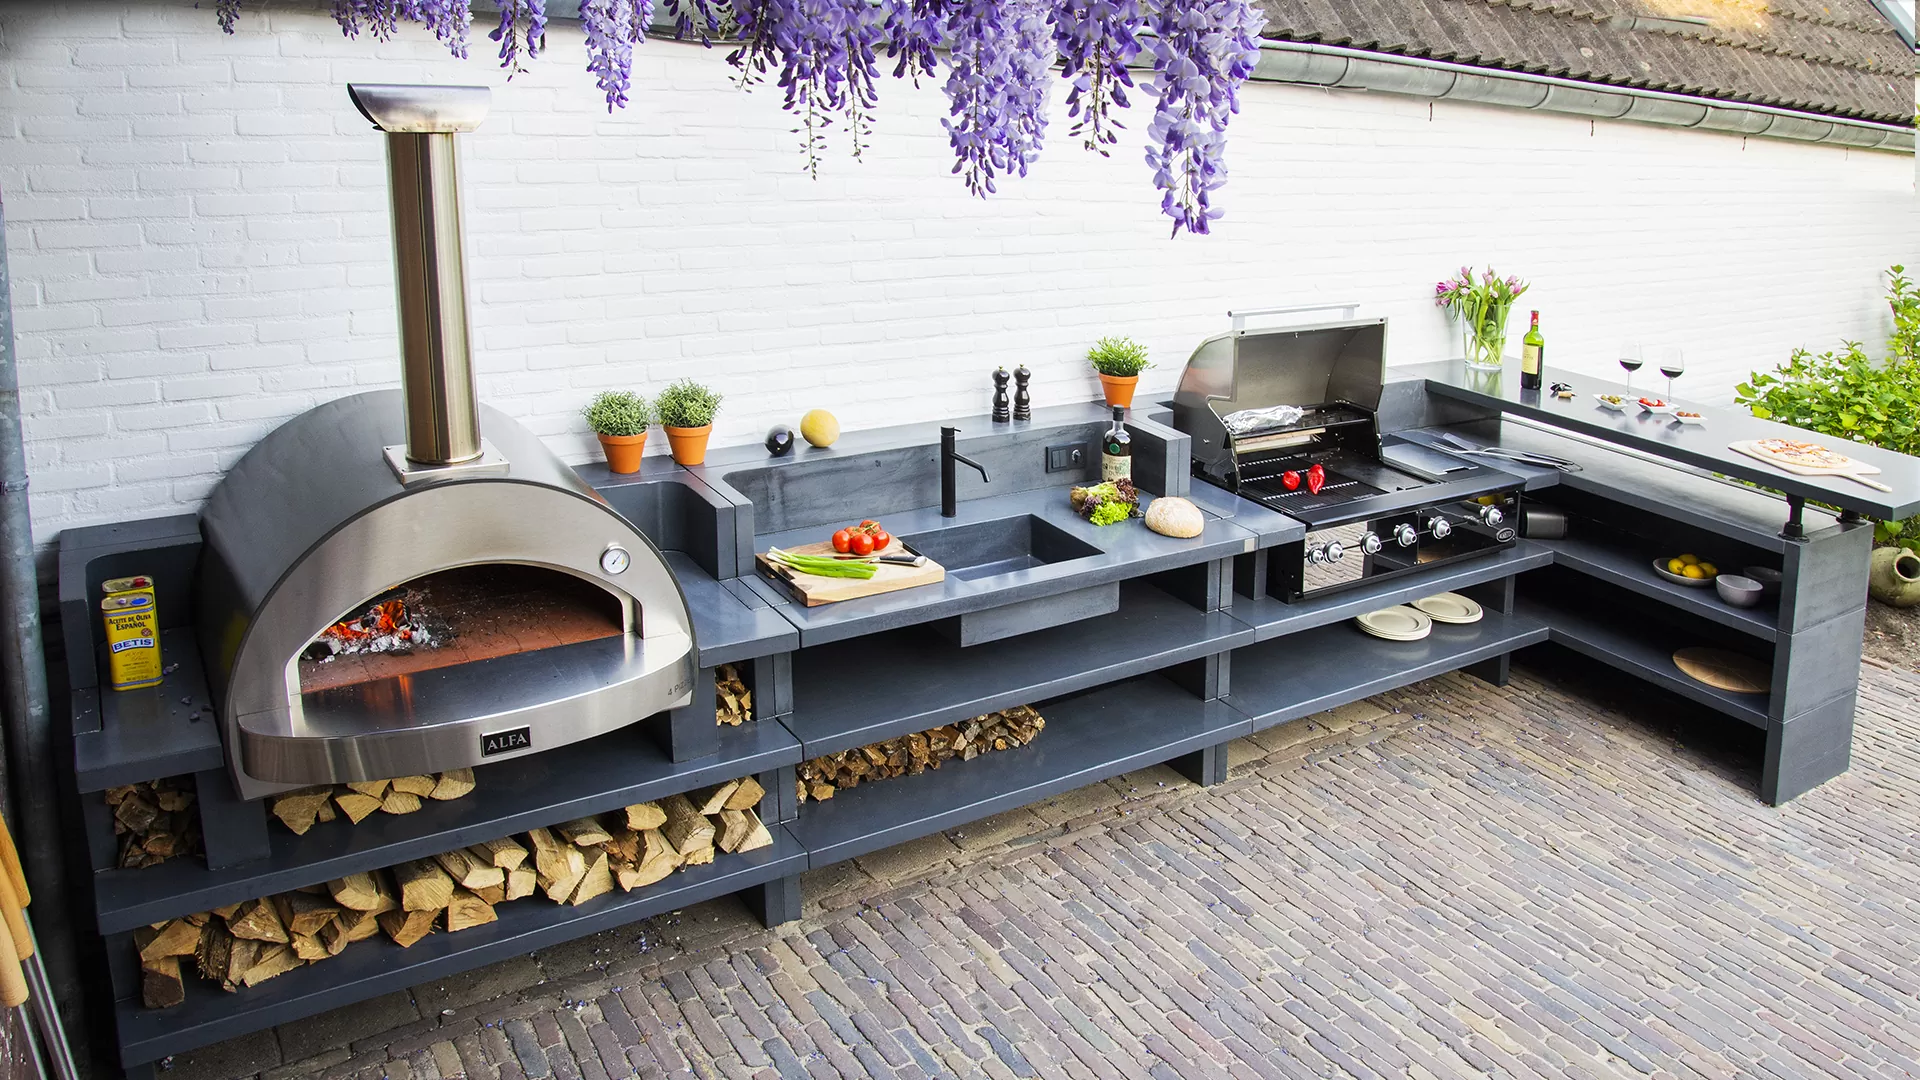 Enjoy Cooking with An Outdoor Kitchen .jpg